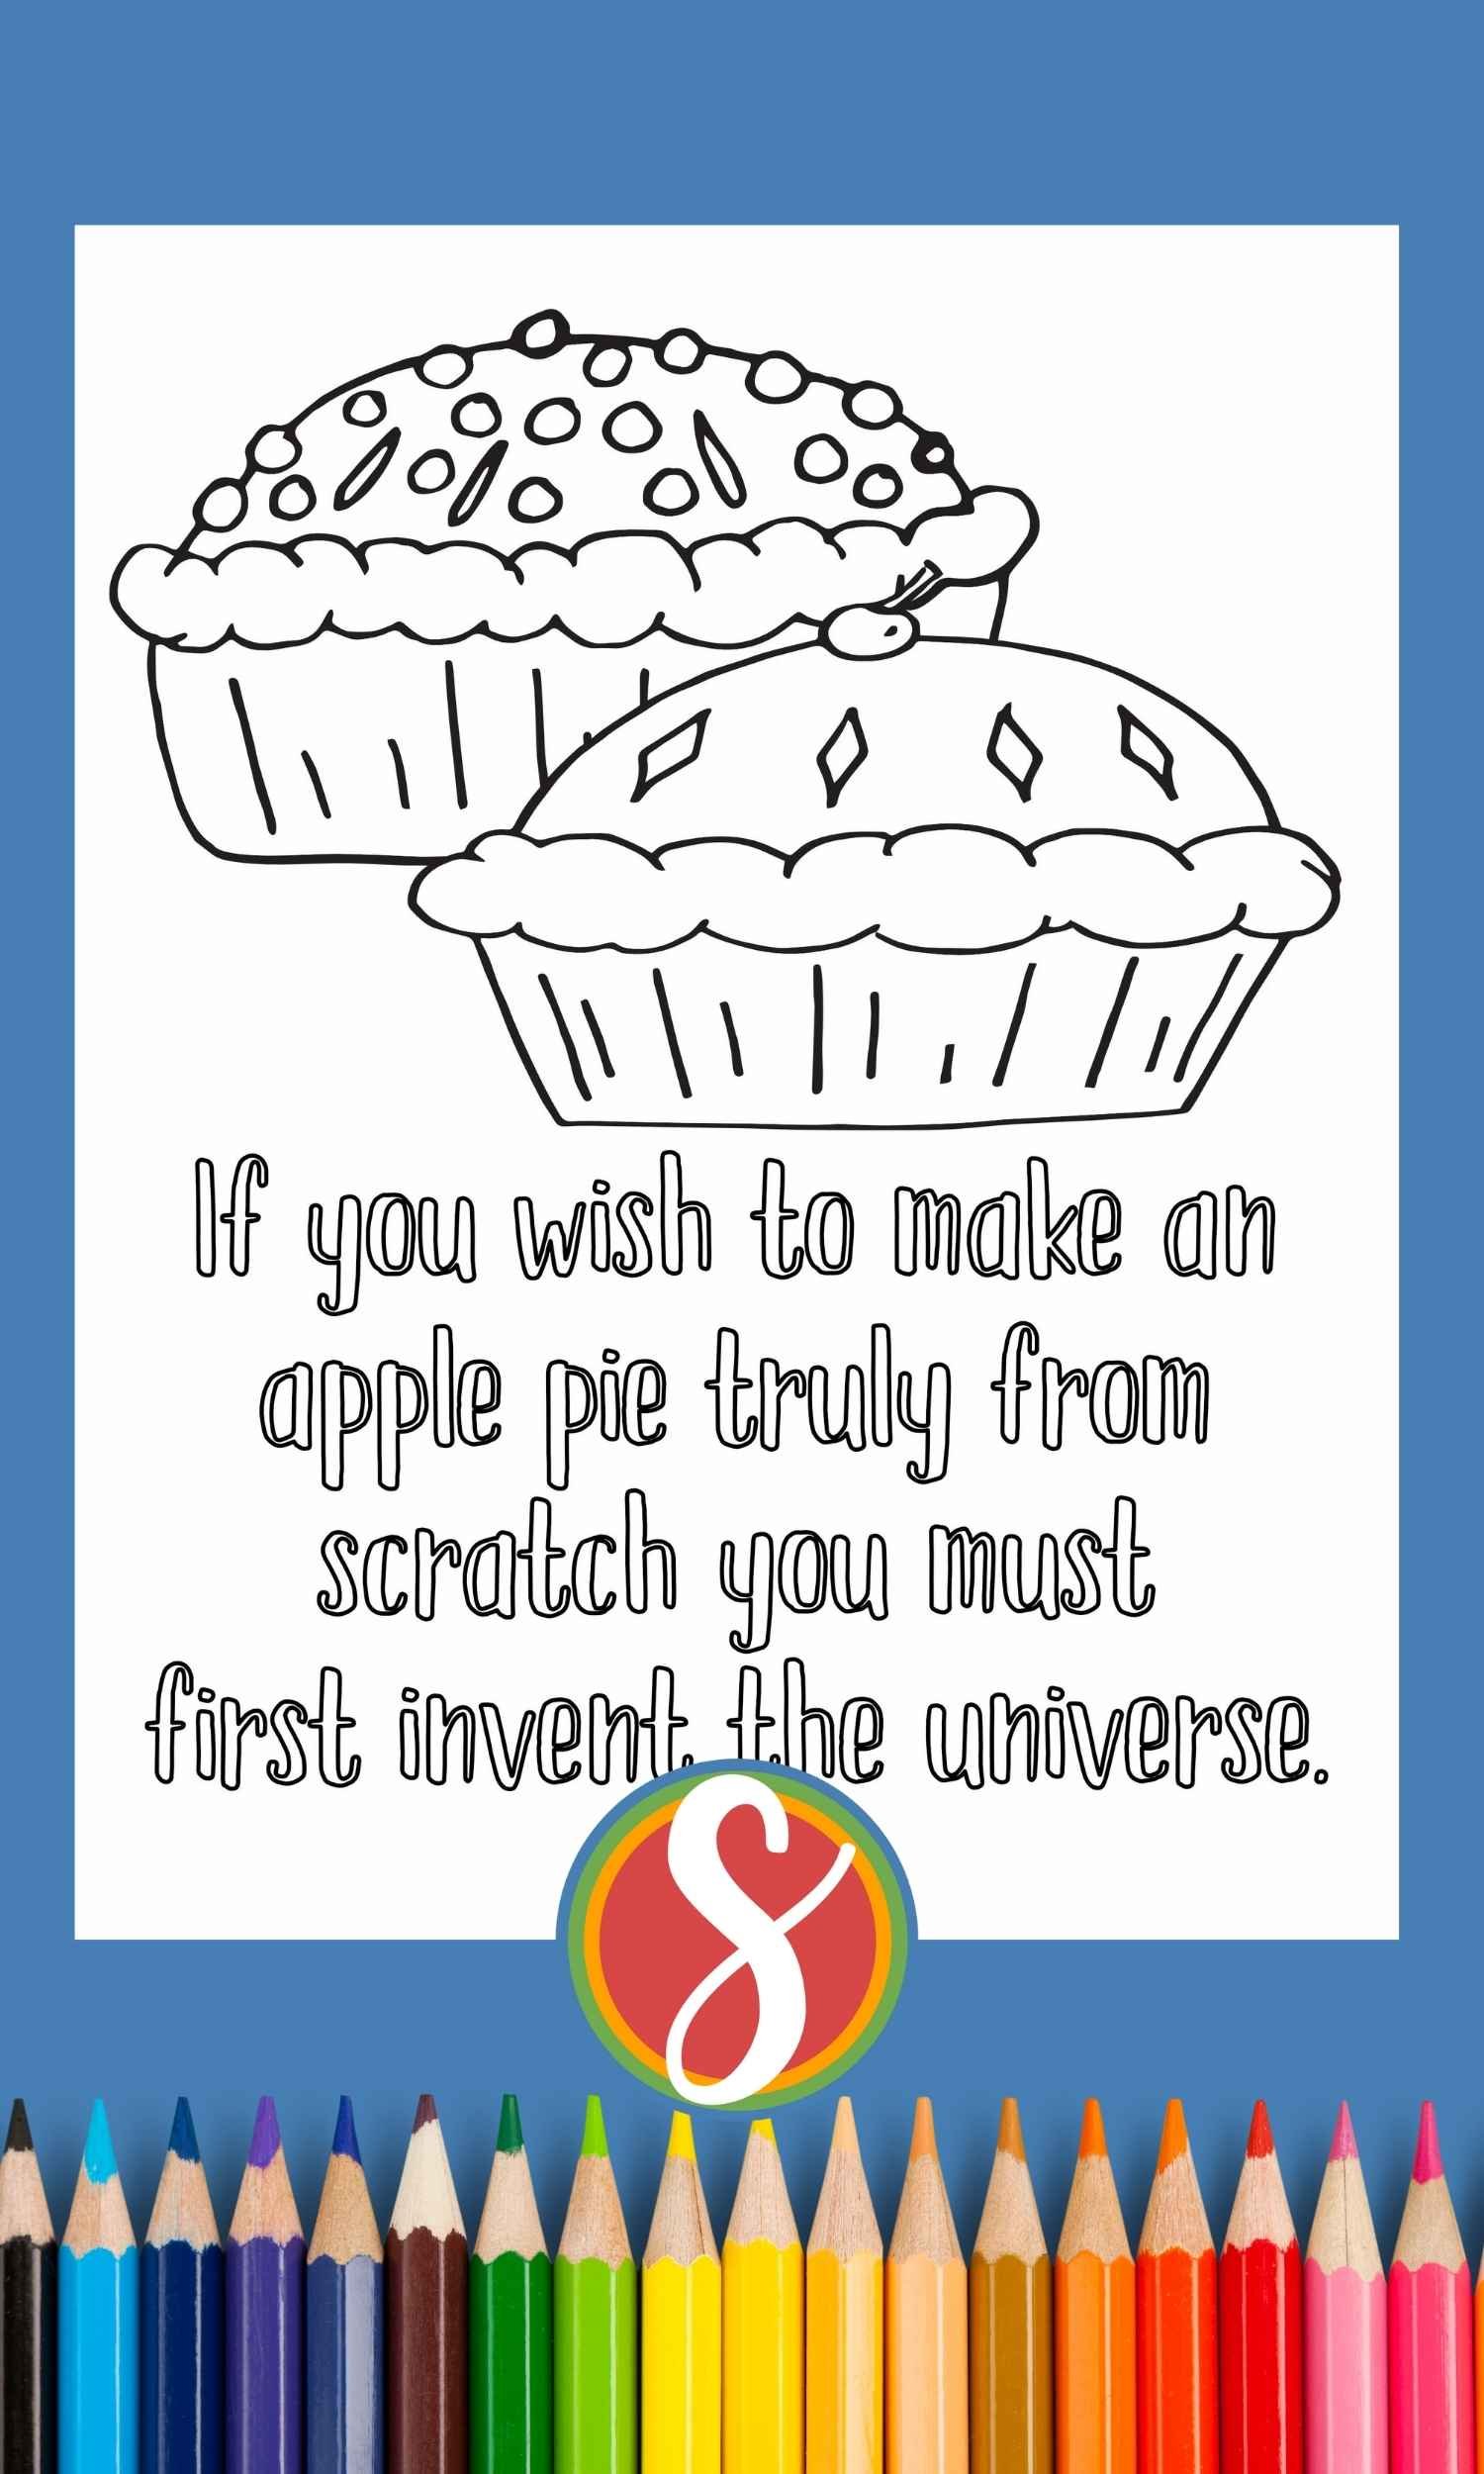 2 colorable pies and colorable quote "if you wish to make an apple pie truly from scratch you must first invent the universe"